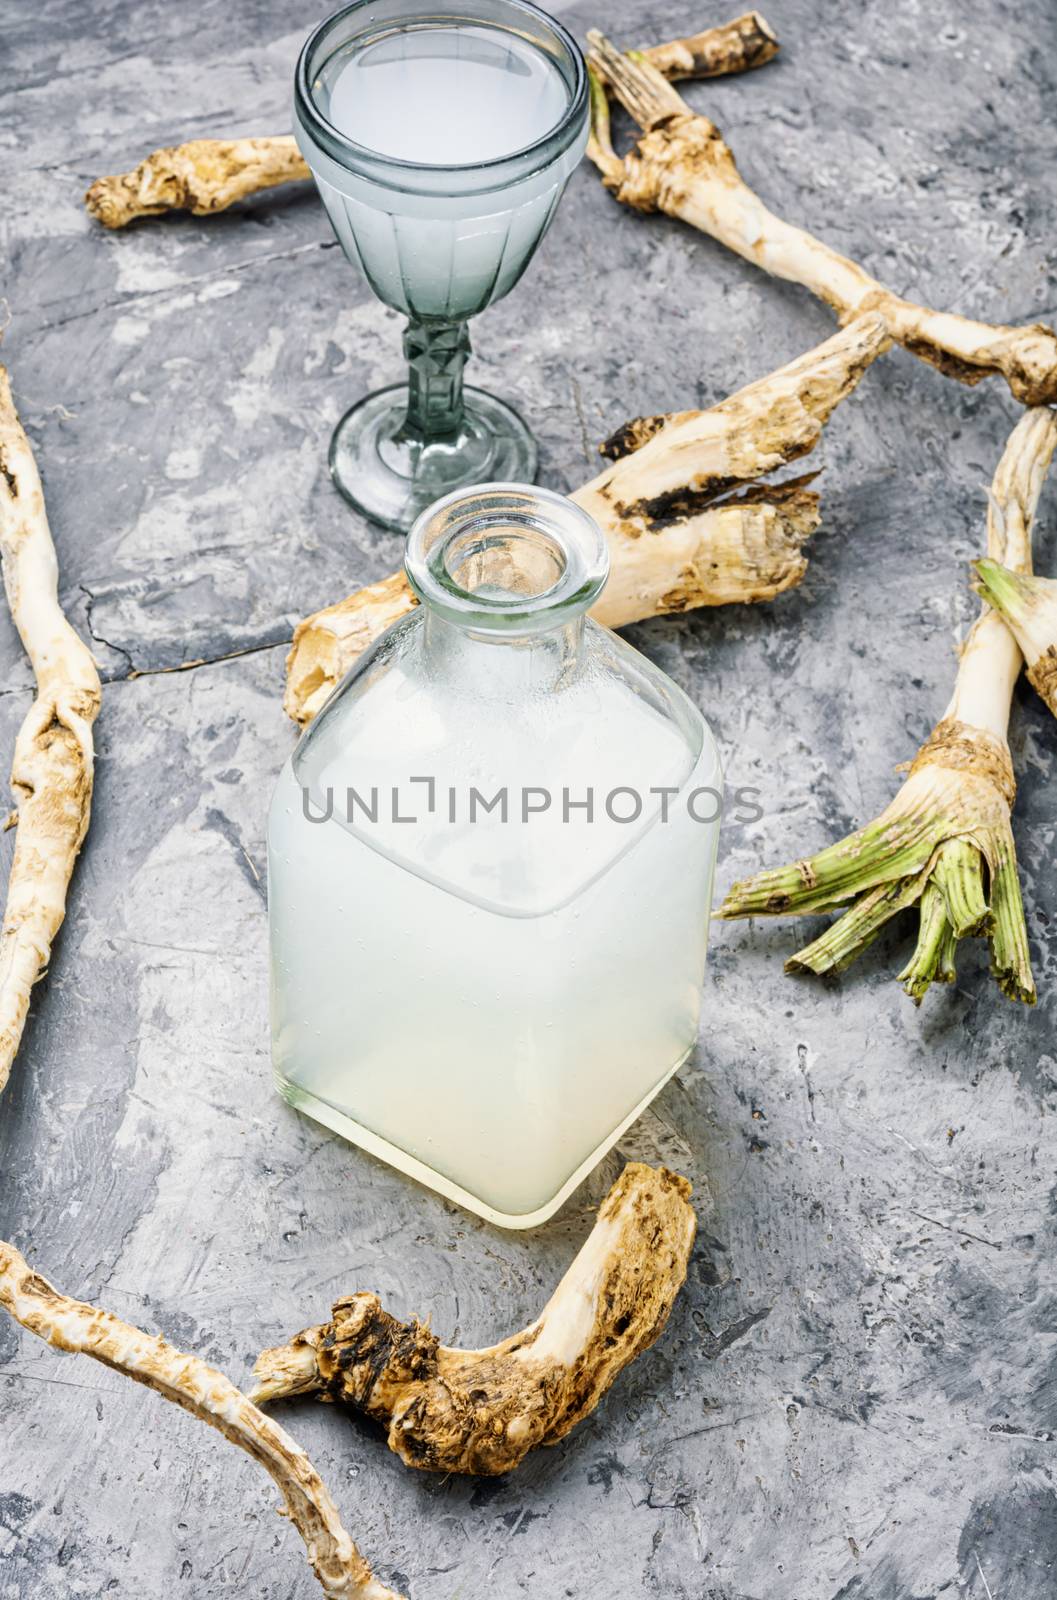 Preparation of alcohol tincture from fresh horseradish root